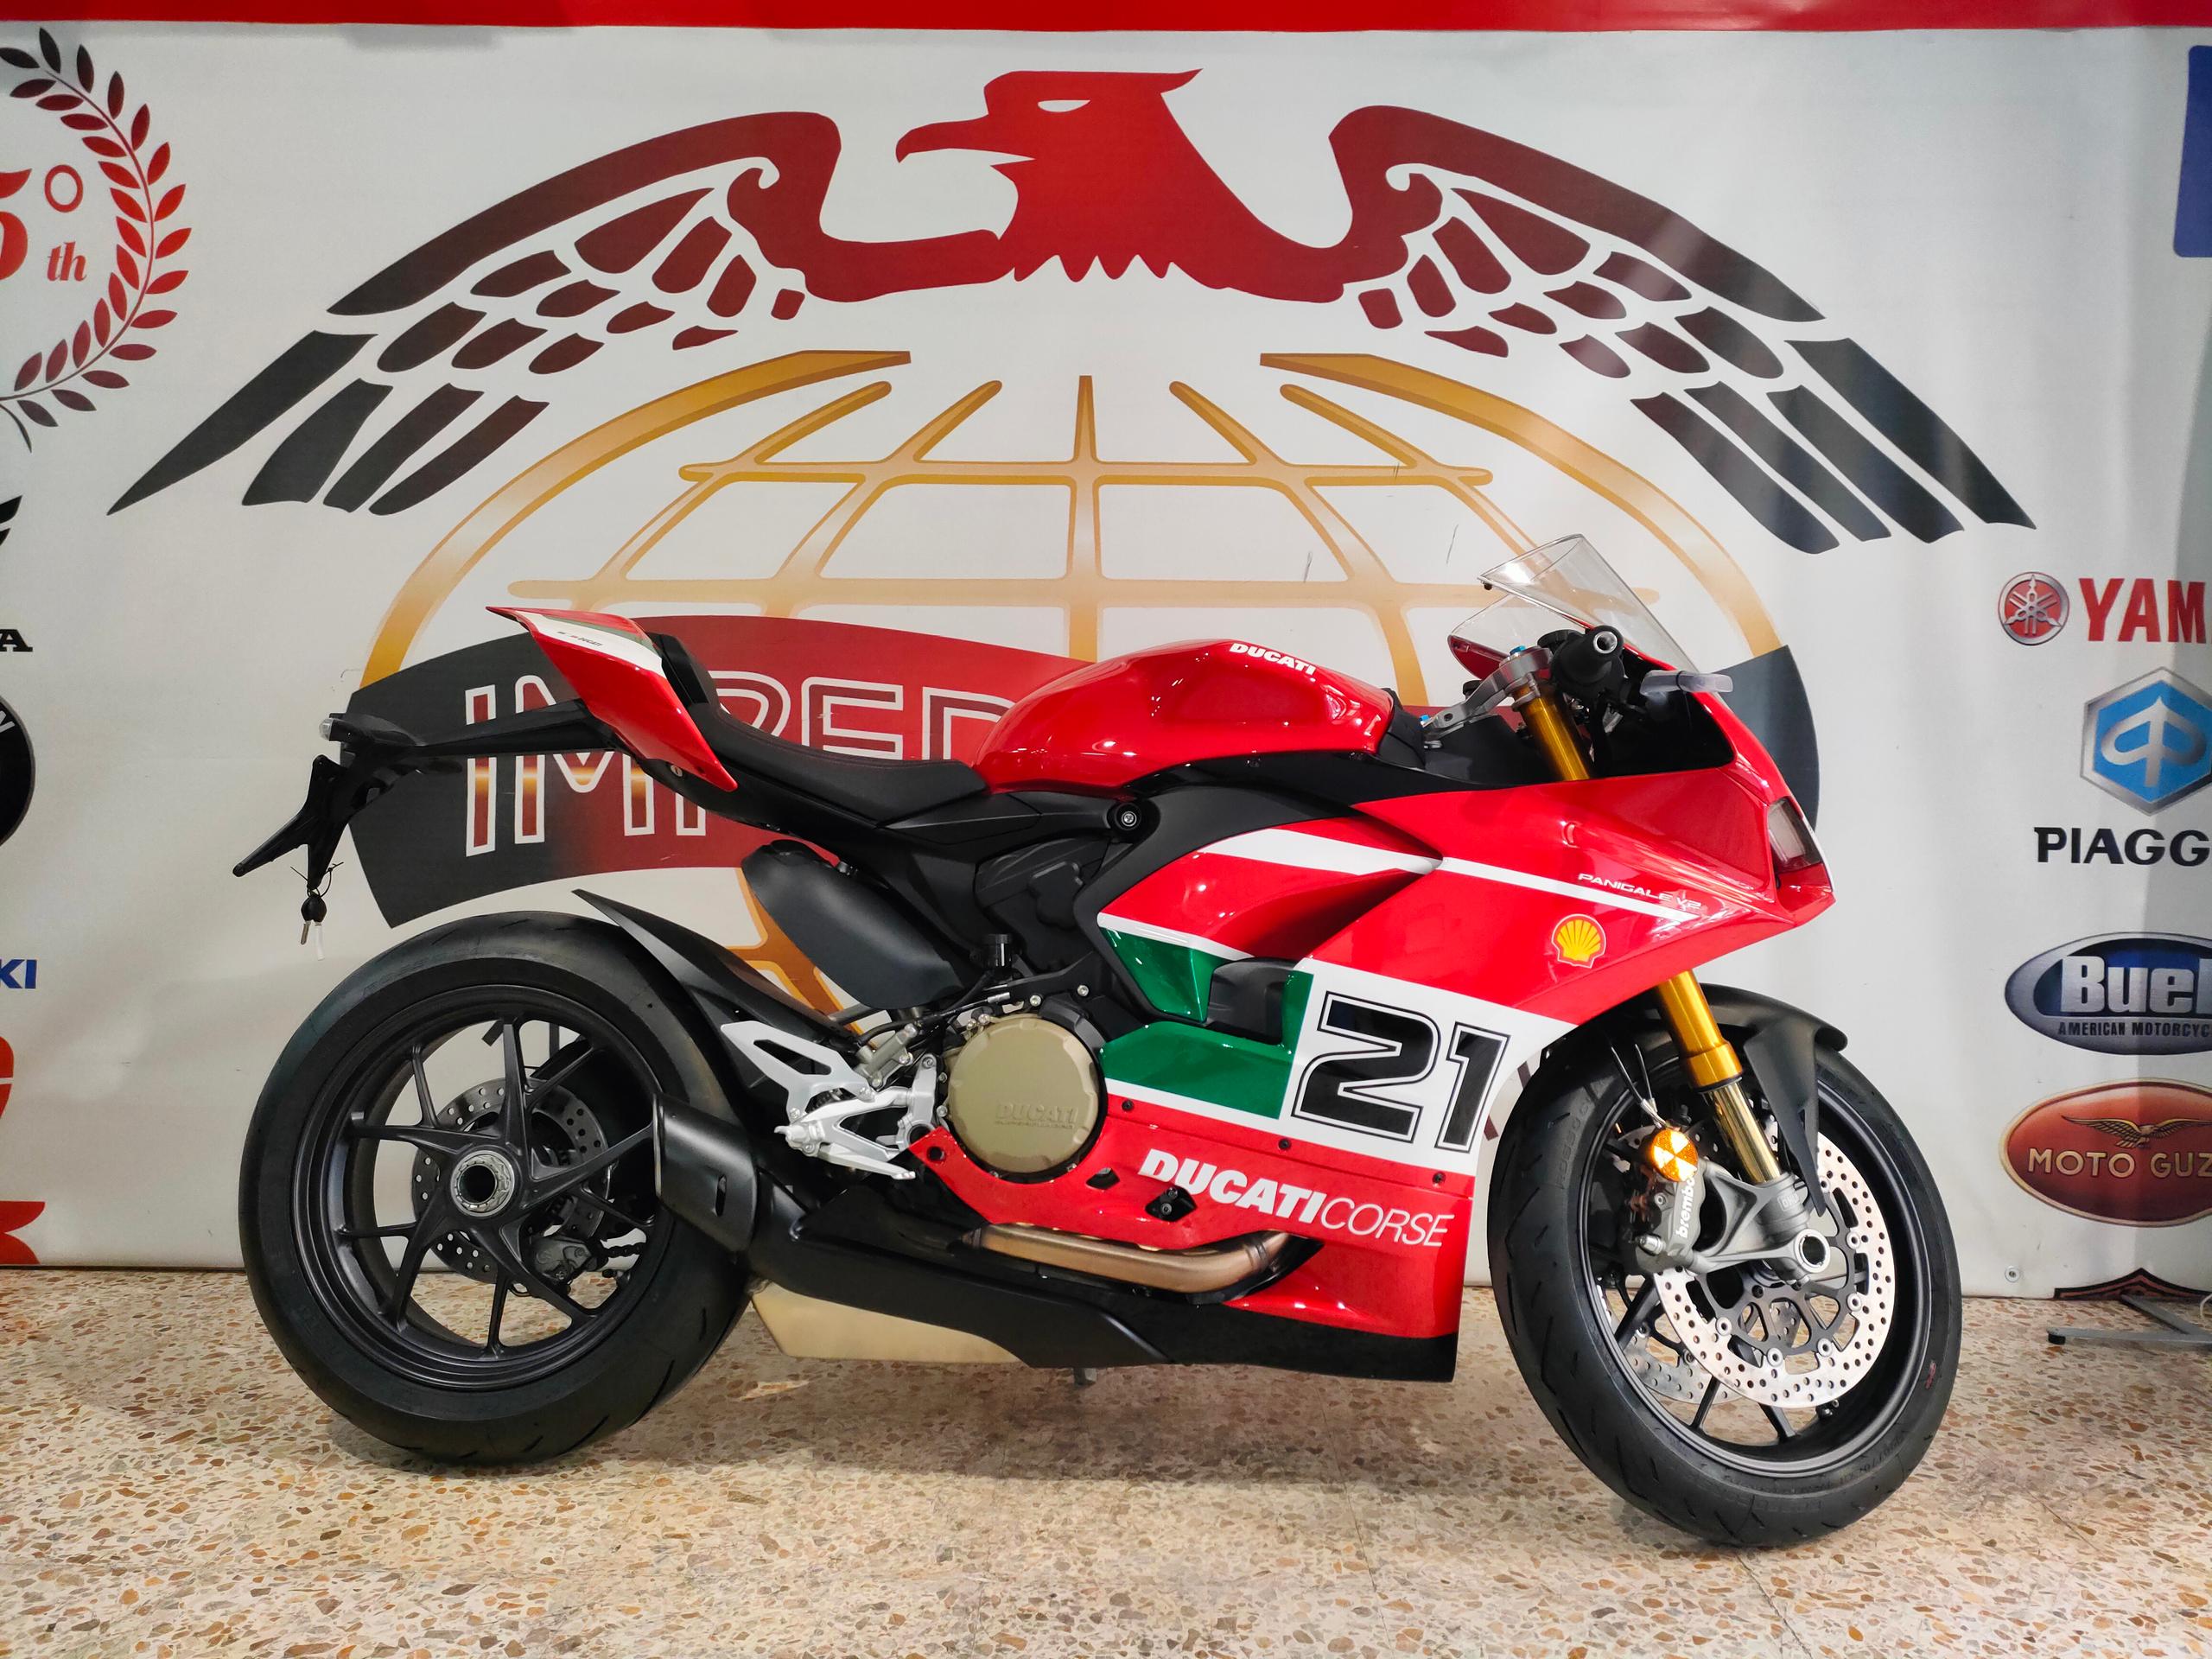 Ducati panigale v2 Bayliss Nuovo Pronta cons.